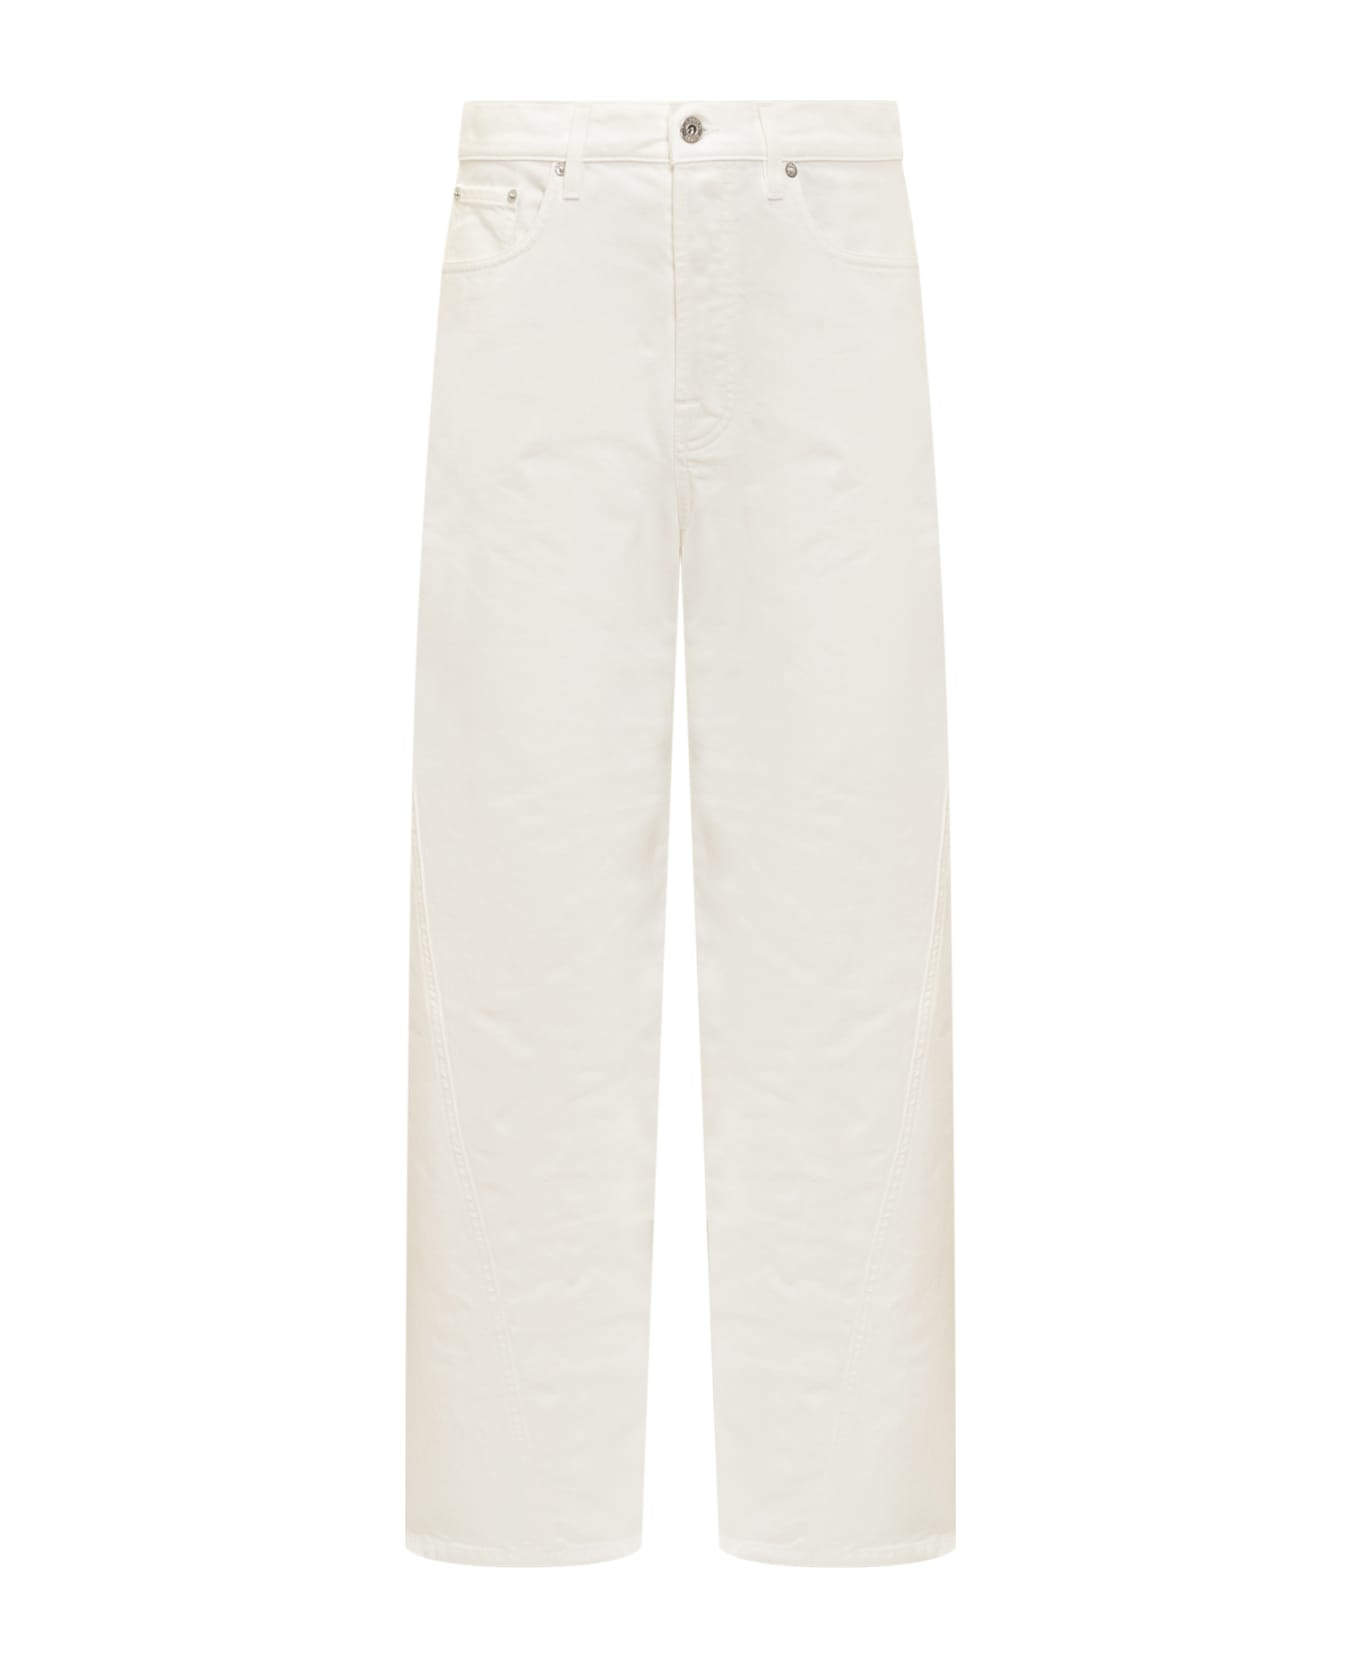 Lanvin Twisted Trousers - OPTIC WHITE ボトムス